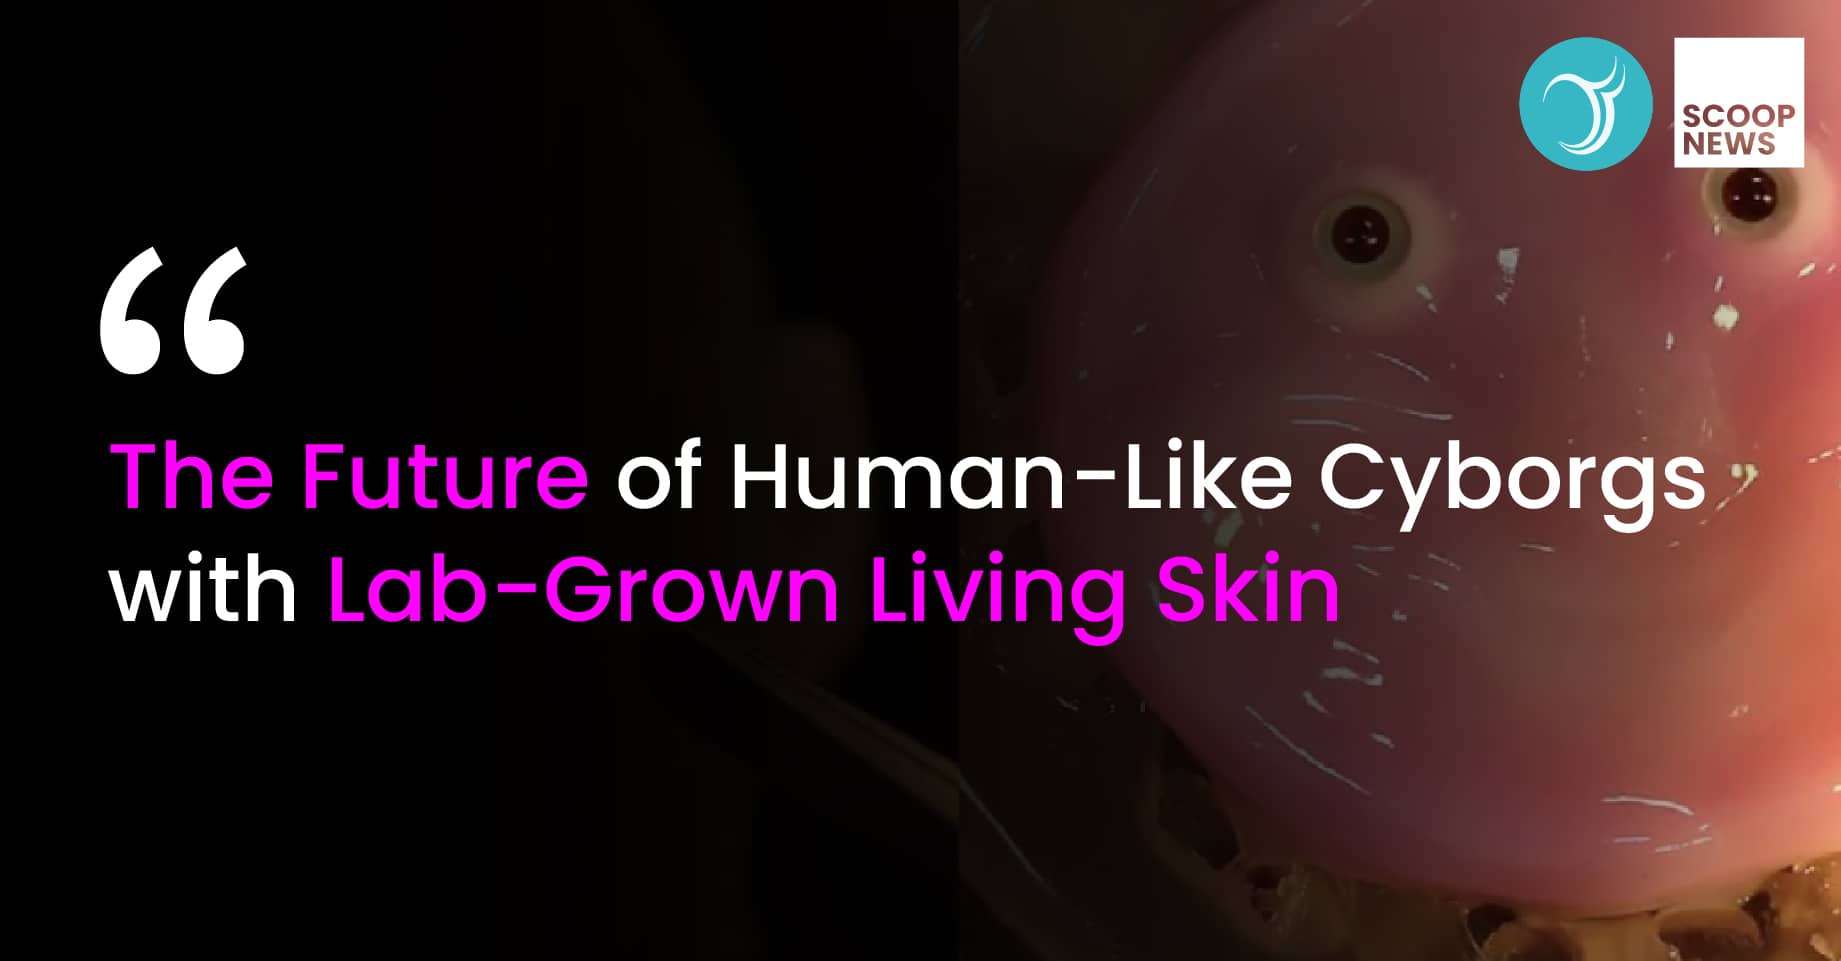 The Future of Human-Like Cyborgs with Lab-Grown Living Skin